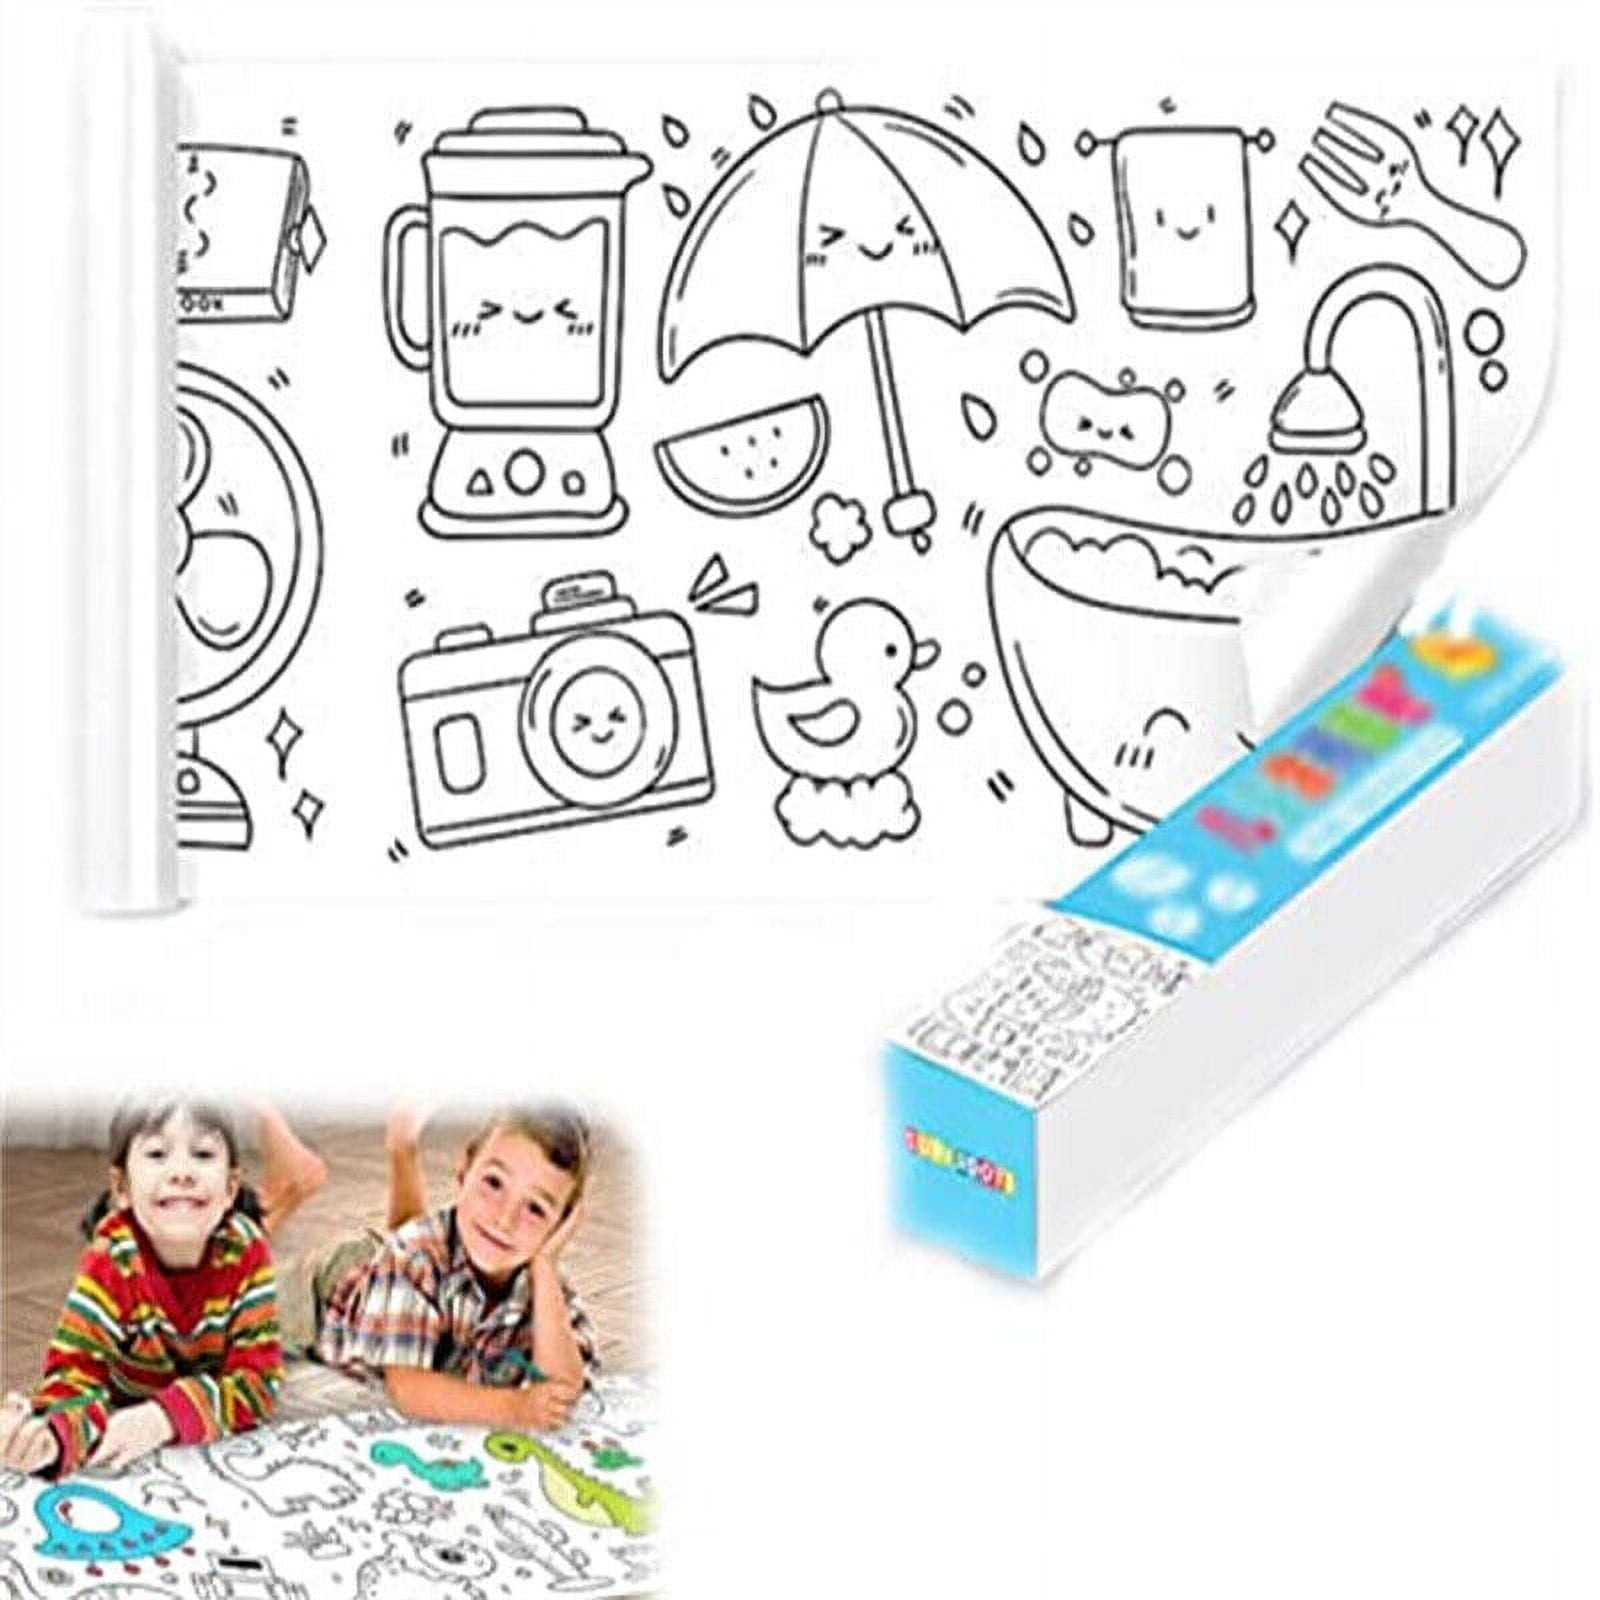 COHEALI 2 Rolls Children's Graffiti Scroll Art Paper for Drawing and  Painting Large Coloring Poster Art Home Activities for Kids Art Paper for  Kids